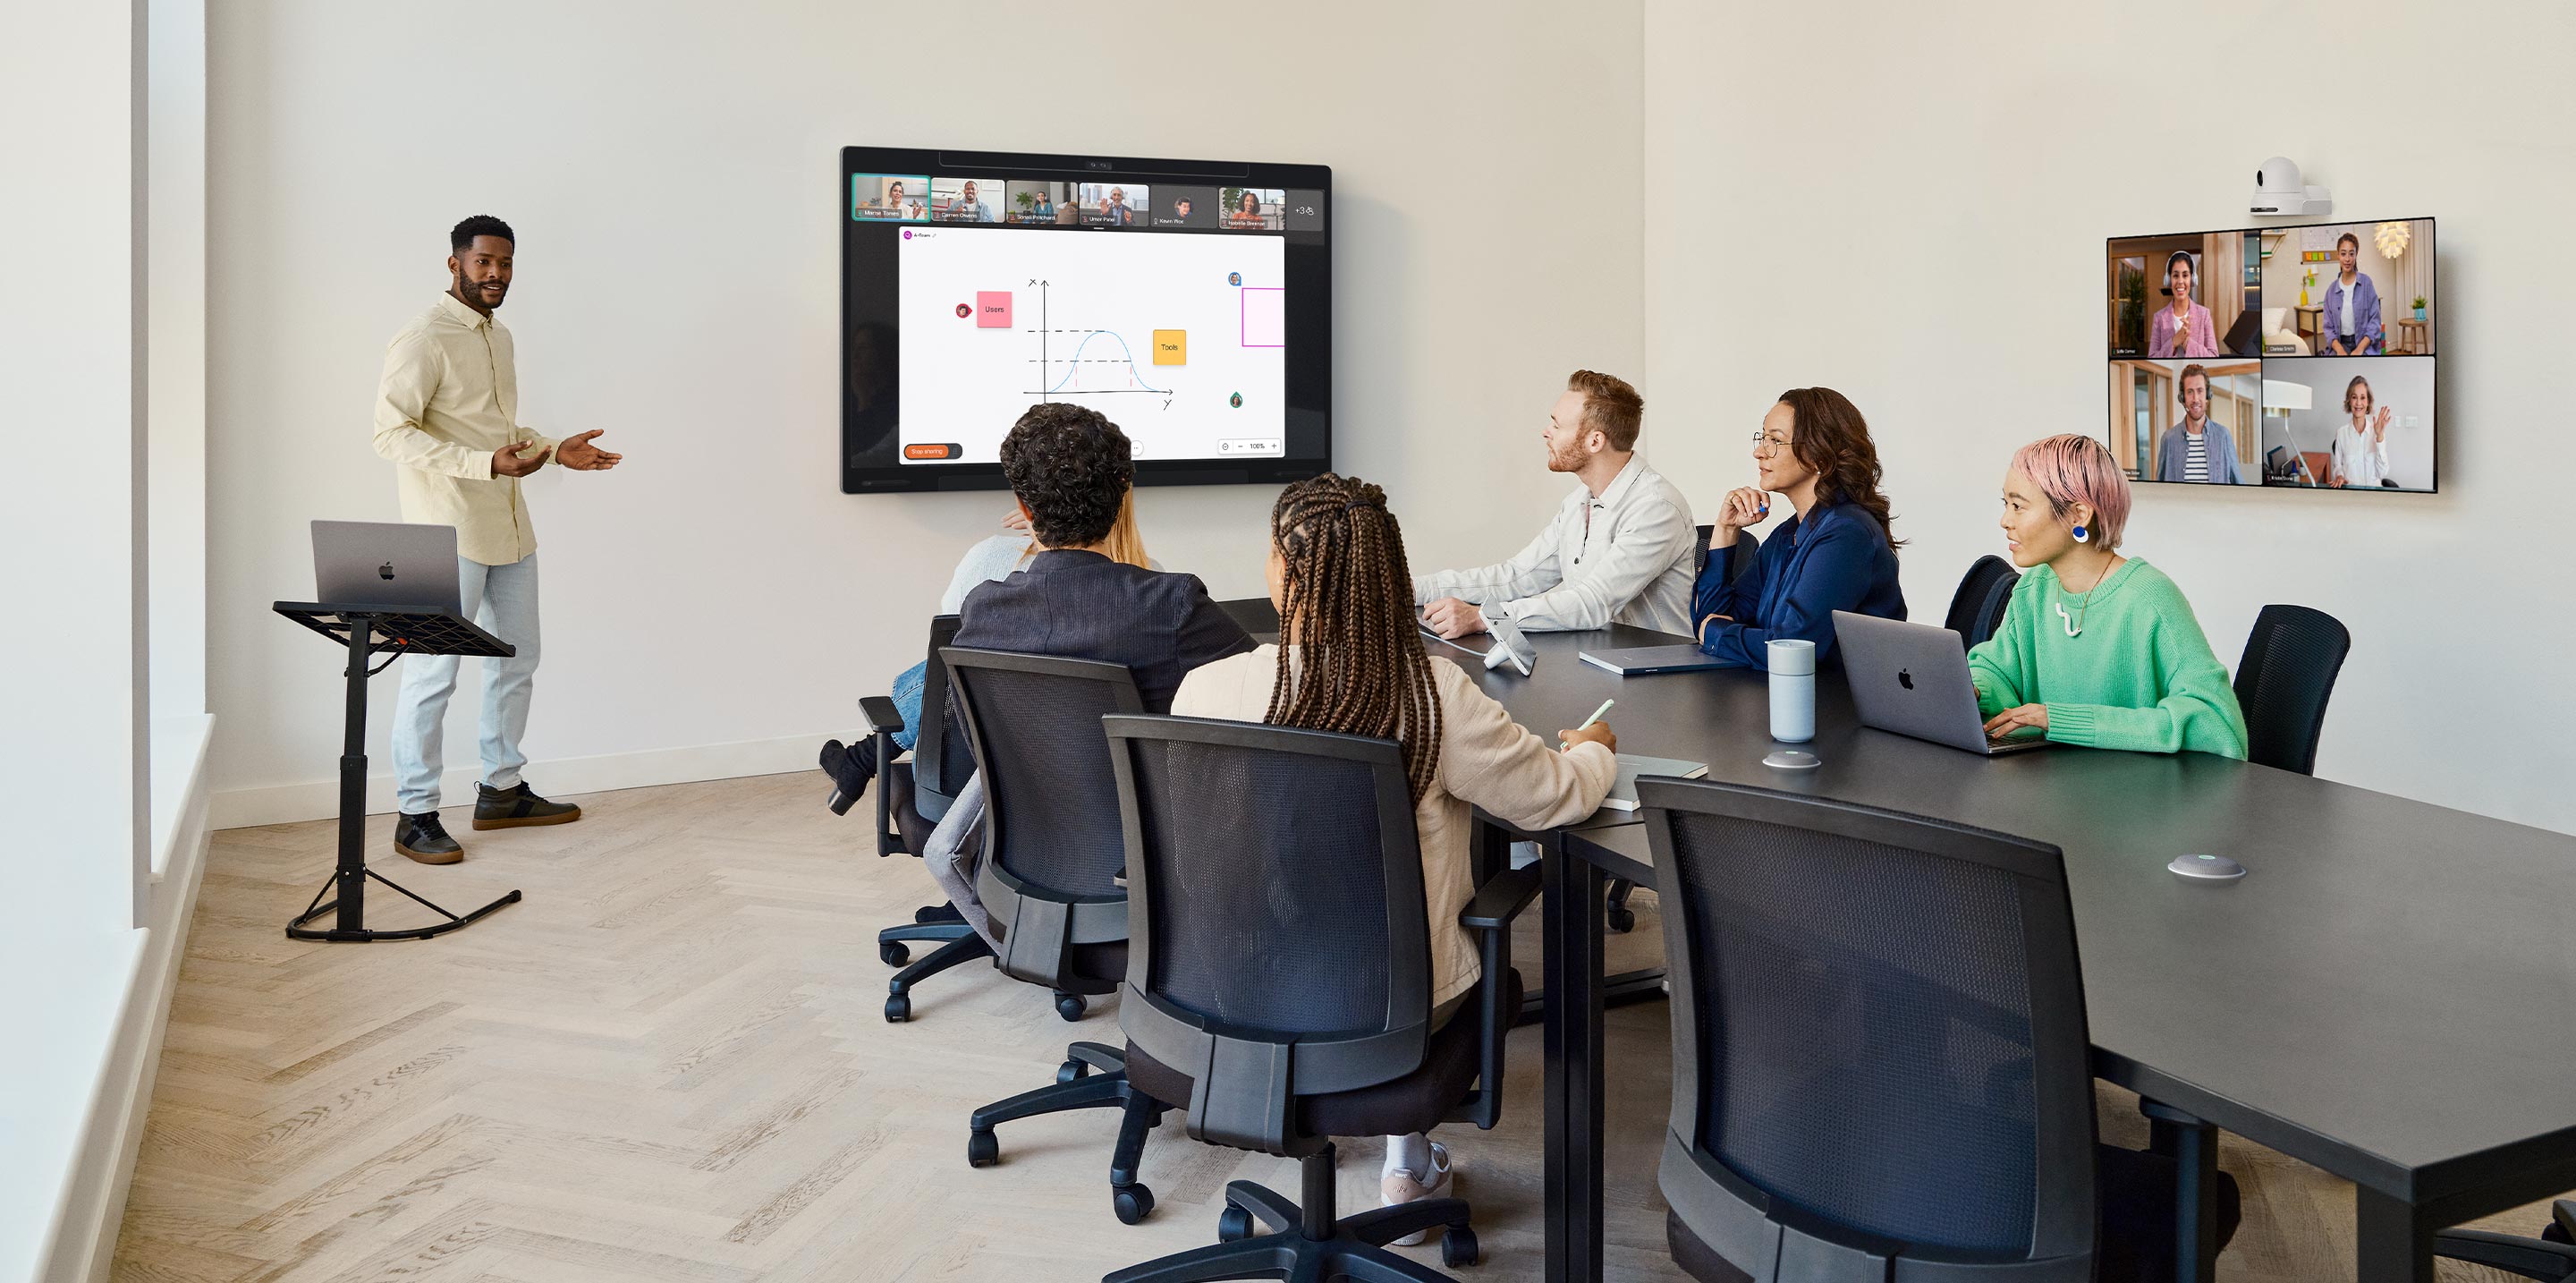 Seven people collaborating in a large training room with the wall-mounted Cisco Board Pro, the tabletop Cisco Room Navigator control panel, the directional Cisco Table Microphone Pro devices on the tabletop, the Cisco PTZ 4K Camera mounted on the sidewall above a secondary external display which shows remote participants. The local presenter hosting the hybrid training using digital whiteboarding on the Board Pro in an active video meeting. The Board Pro screen shows a whiteboard canvas with digital sticky notes, charts, and the live video of remote participants. The PTZ 4K Camera is facing towards the local presenter to track the person and send the camera image to remote training participants.